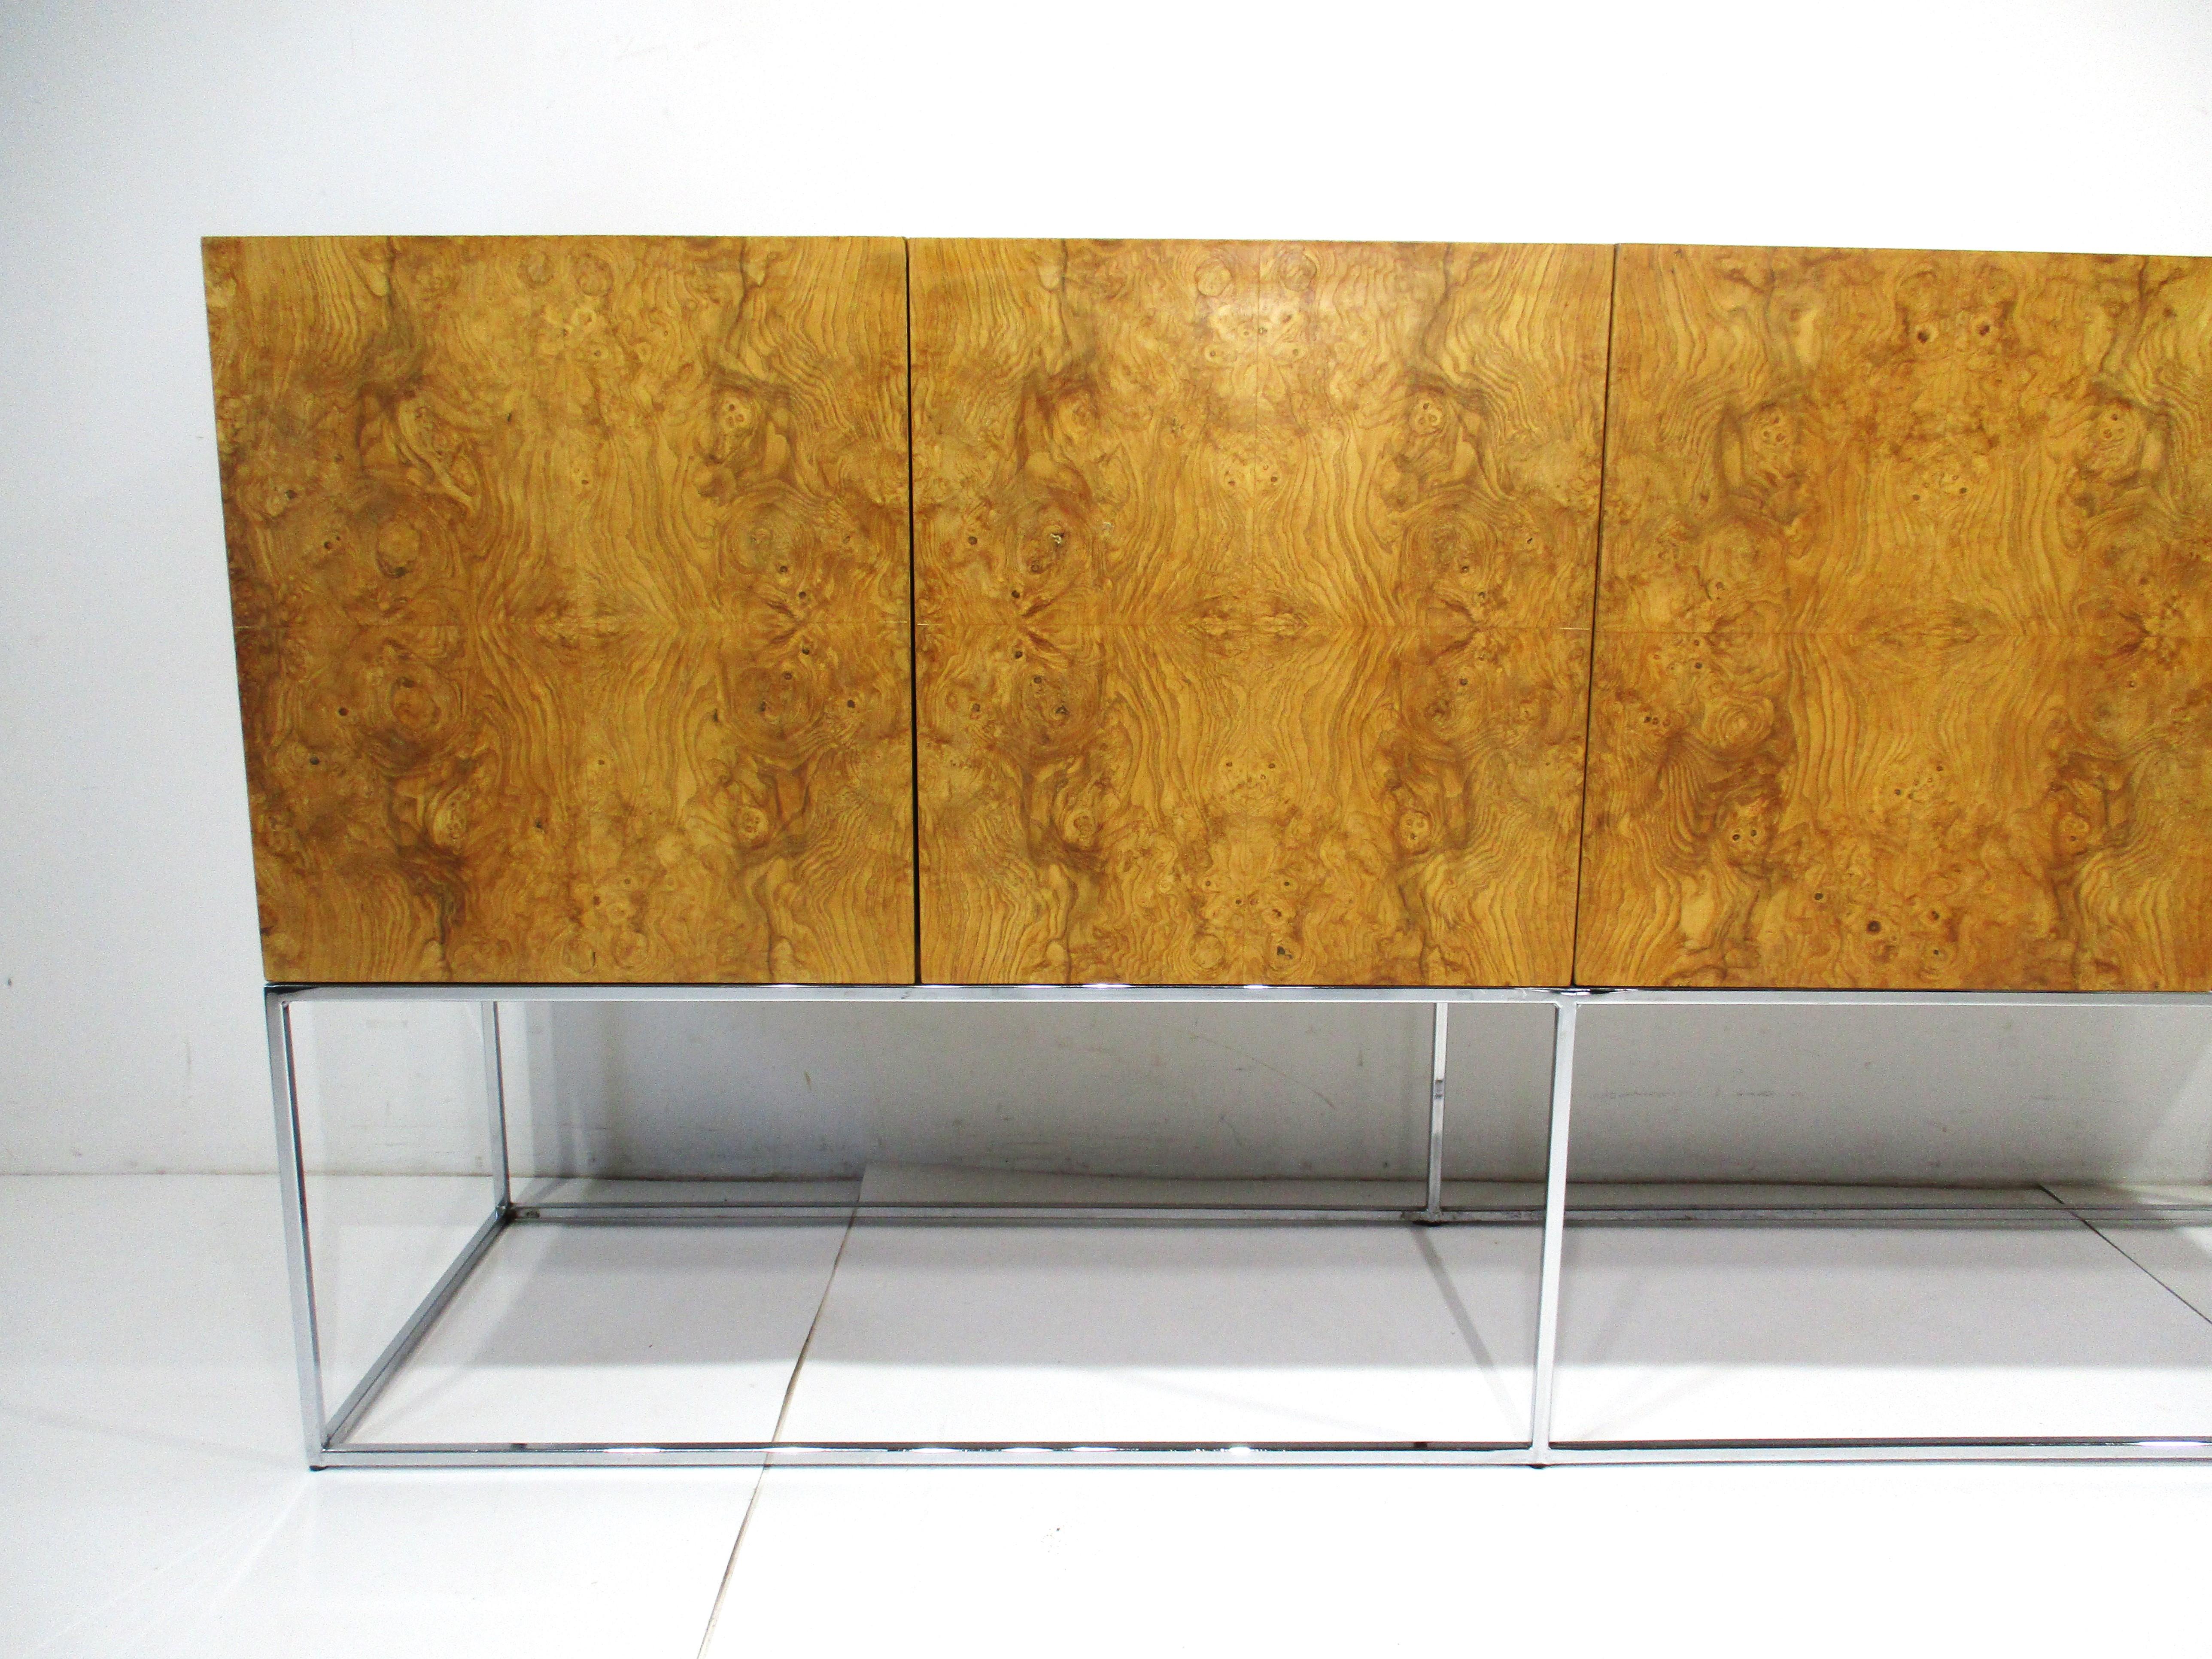 American Milo Baughman Olivewood Chrome Credenza or Server by Thayer Coggin